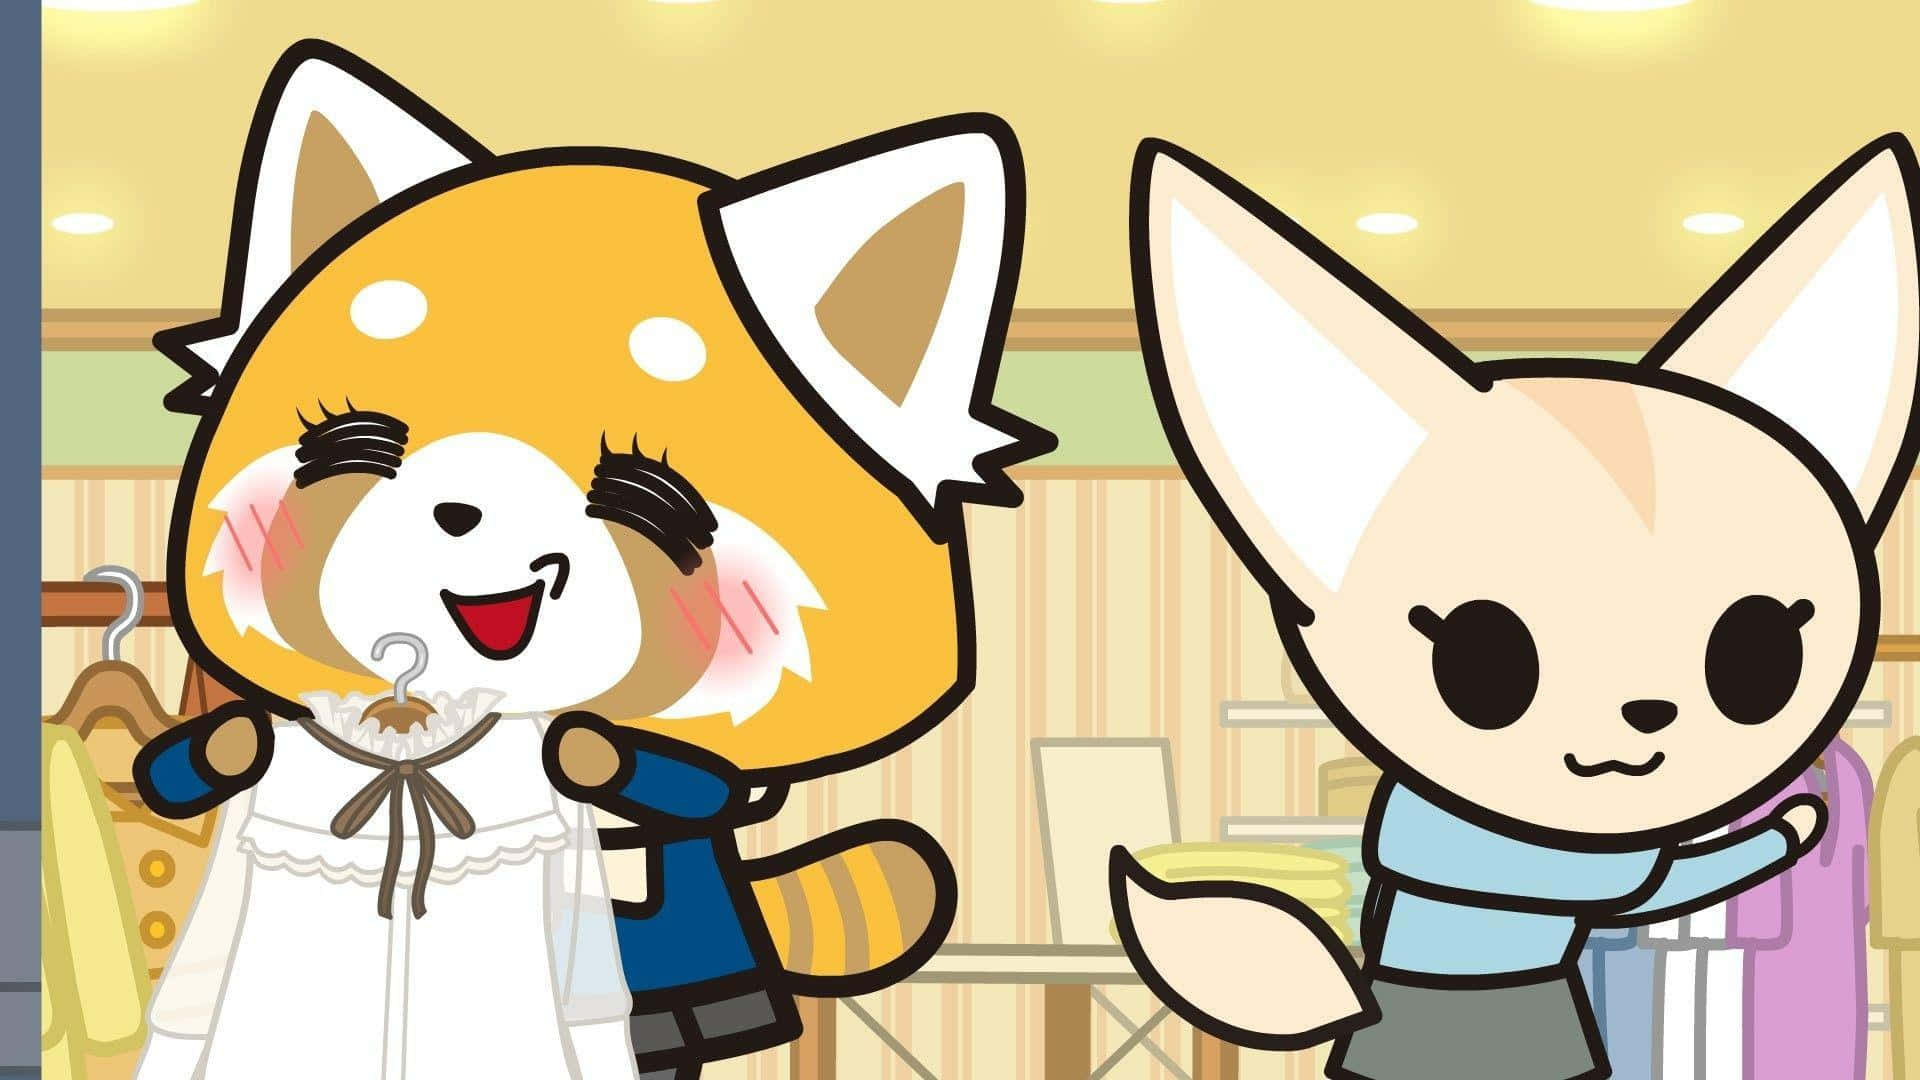 "Aggretsuko the red panda sets forth on an epic quest to find her place in the world!"